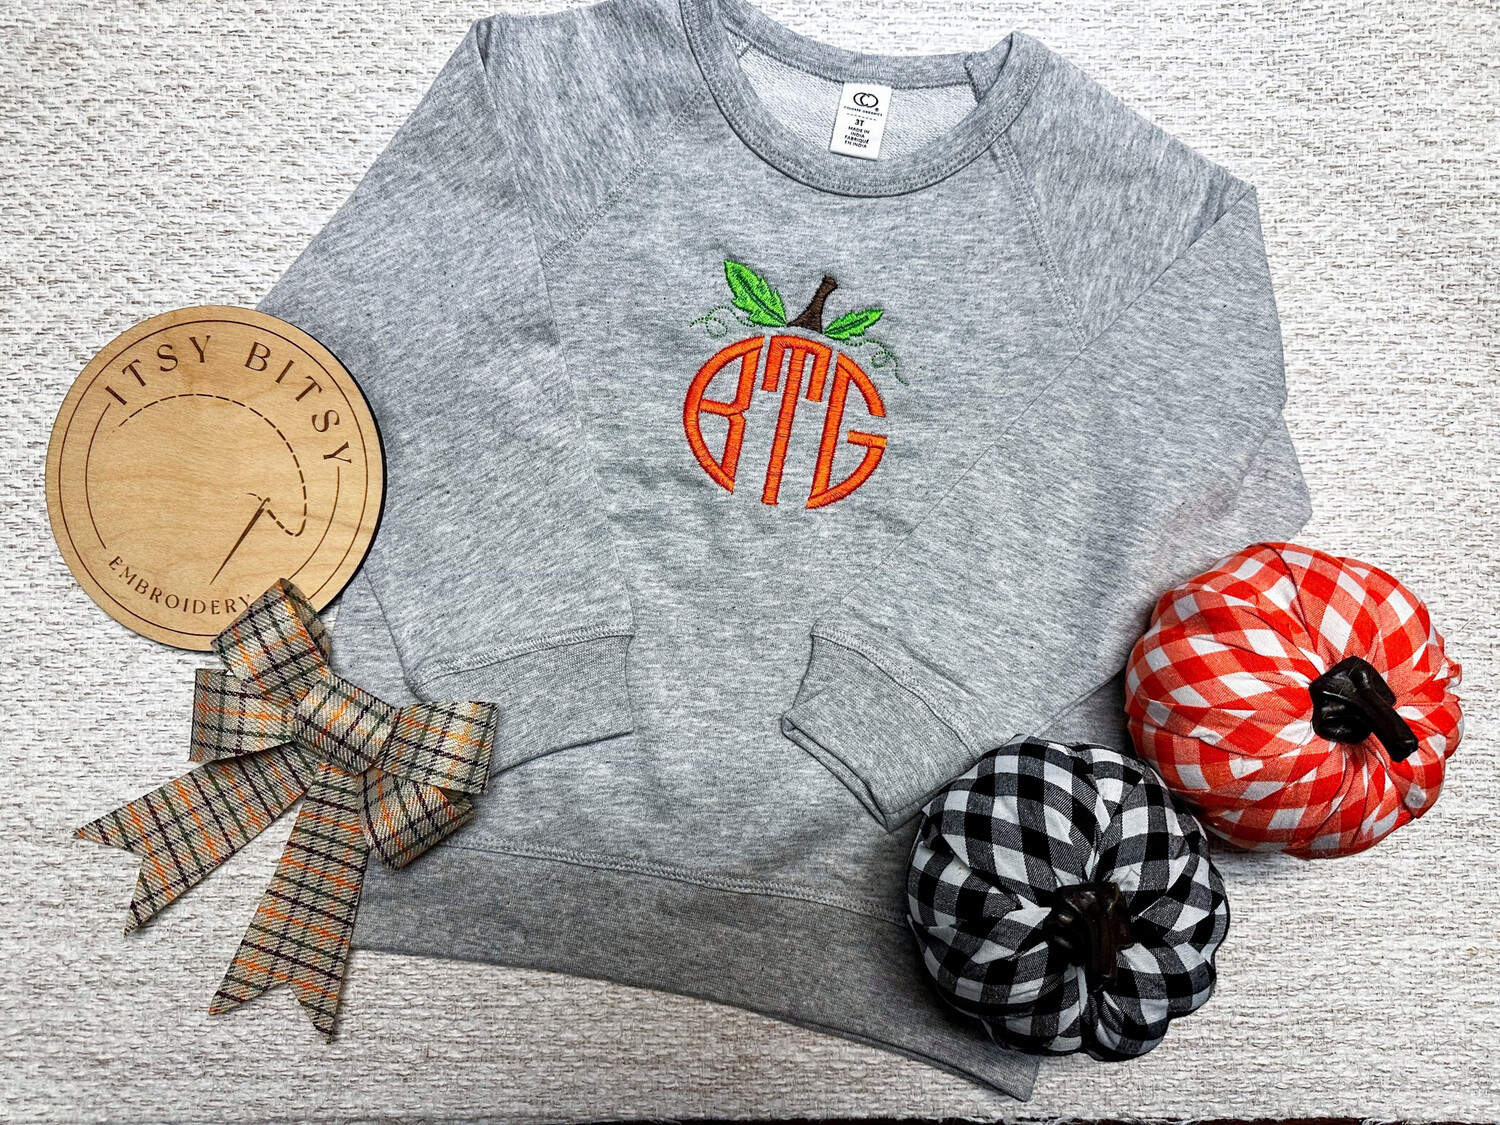 Sweatshirt　Shop　Itsy　Infant/Toddler/Youth　Embroidered　Pumpkin　Sweatshirt,　Monogram　Embroidered　Bitsy　Embroidery